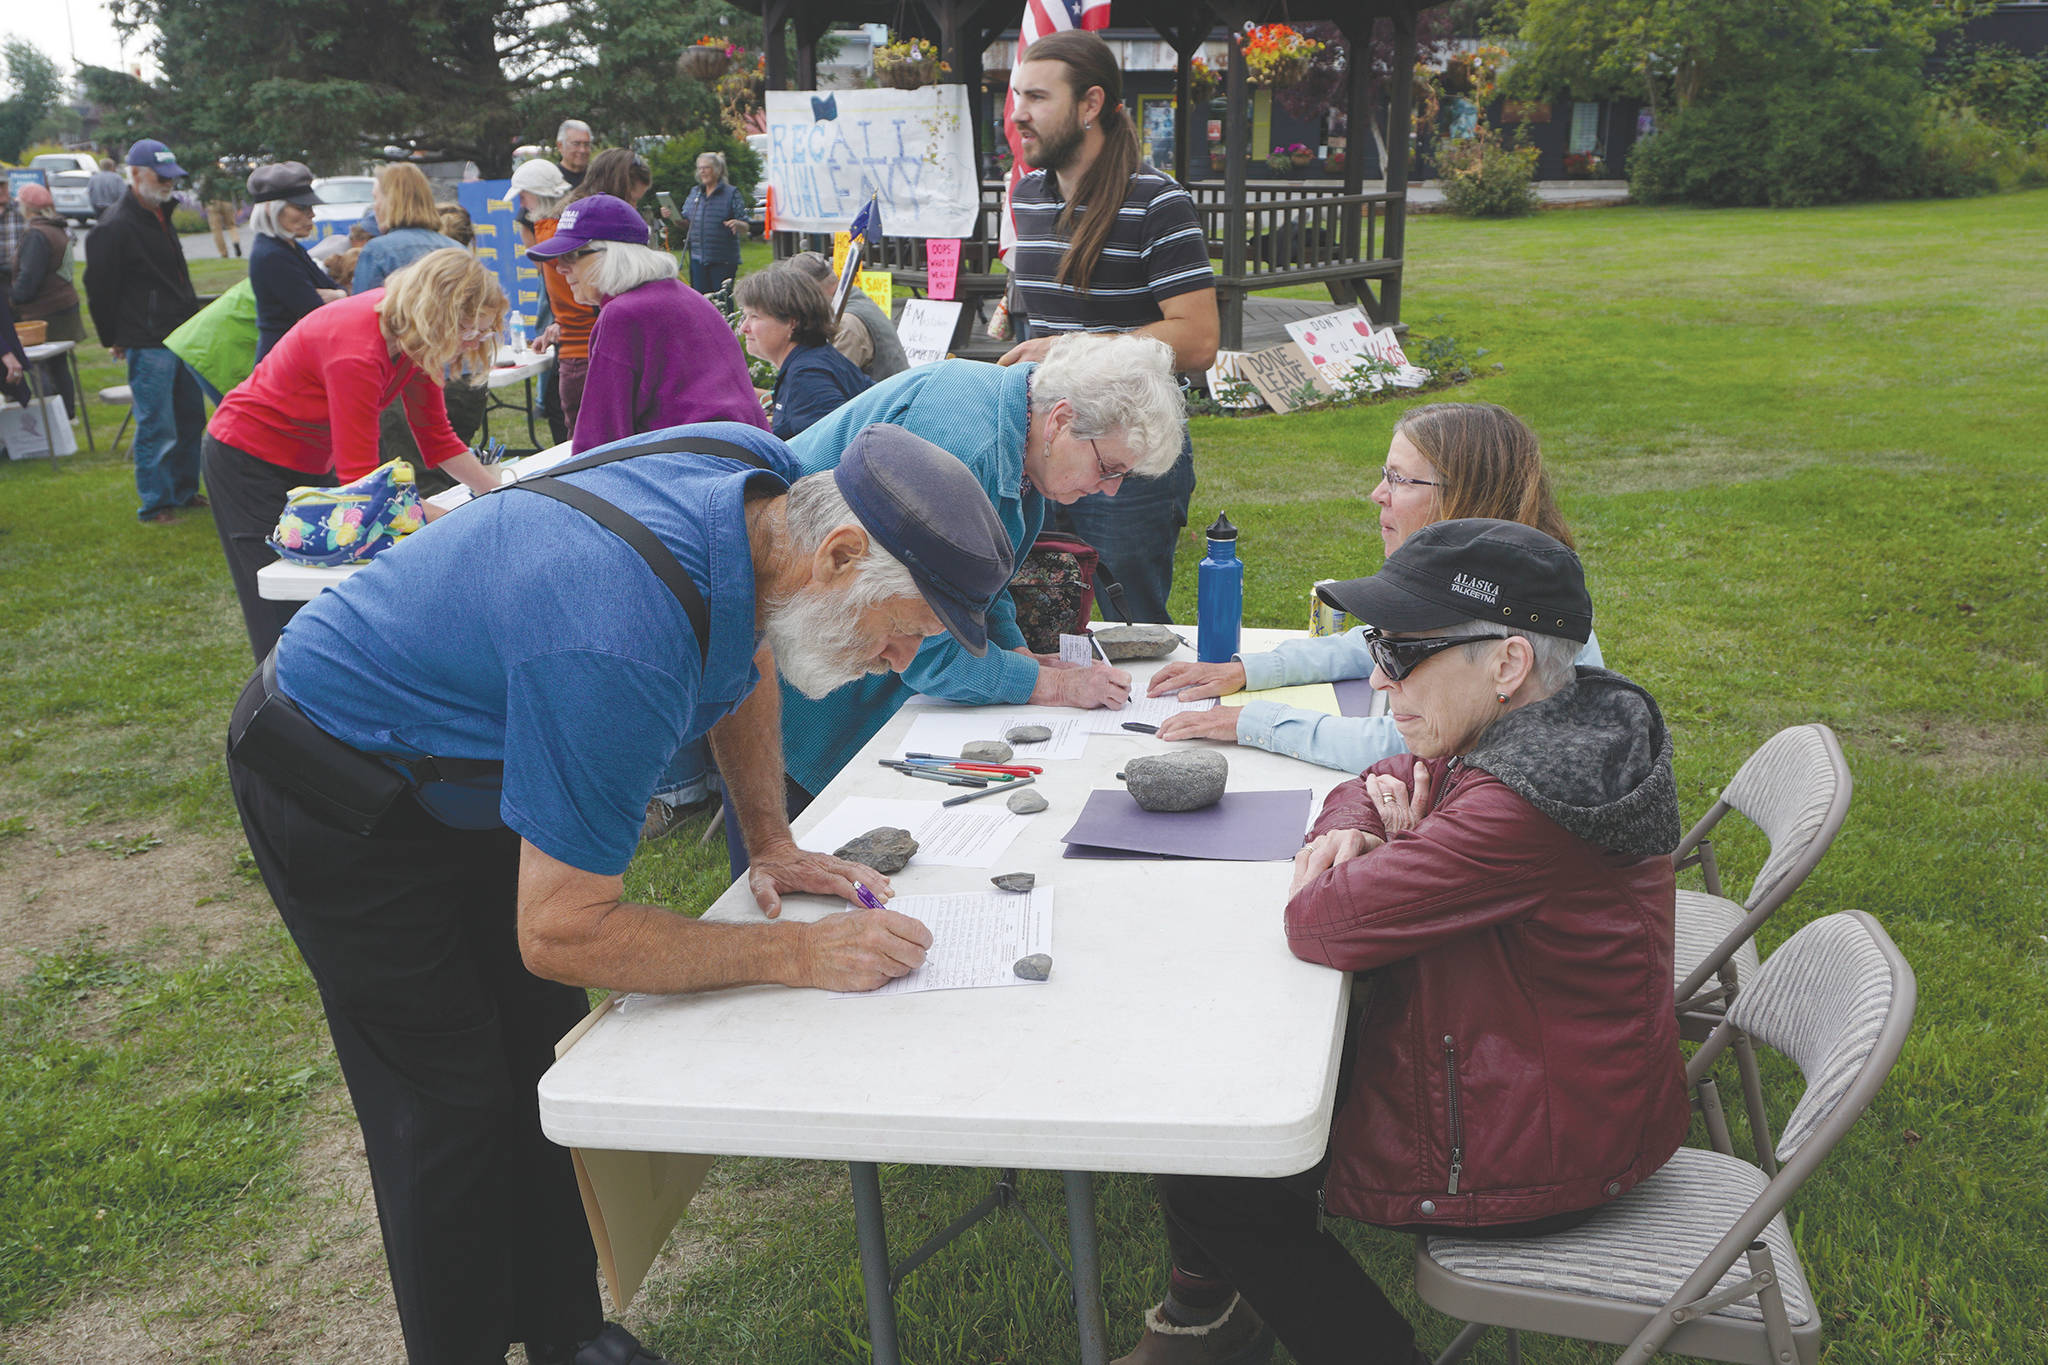 Recall Dunleavy organizers Ann Keffer, right, in hat, and Pat Cue, behind Keffer, take signatures at a Recall Dunleavy rally held on Aug. 1 at WKFL Park in Homer. At left, former Homer Rep. Paul Seaton, NP-Homer, signs a form. Seaton lost to Rep. Sarah Vance, R-Homer, in the general election. (Photo by Michael Armstrong)